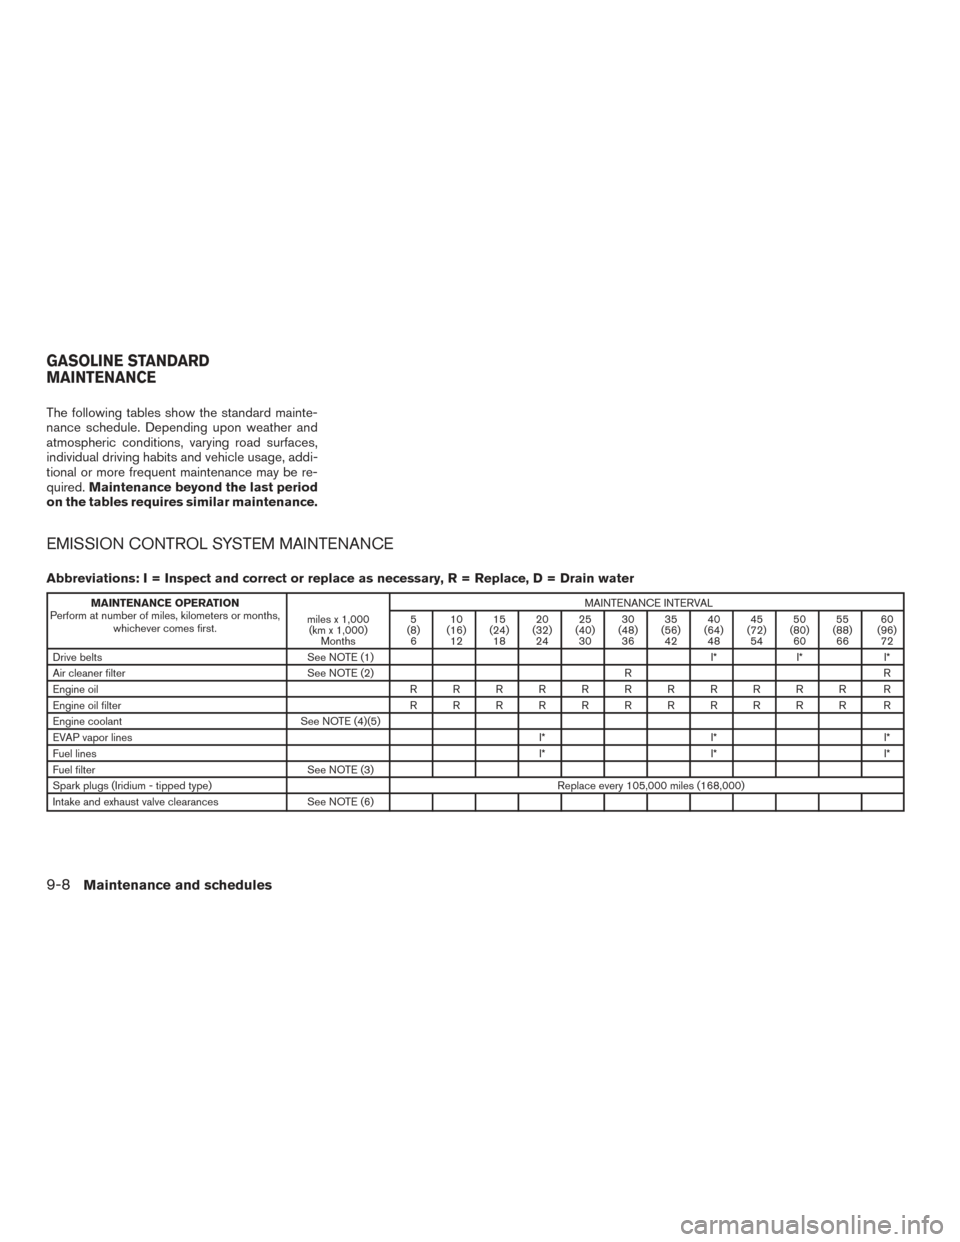 NISSAN TITAN 2016 2.G Service Manual The following tables show the standard mainte-
nance schedule. Depending upon weather and
atmospheric conditions, varying road surfaces,
individual driving habits and vehicle usage, addi-
tional or mo